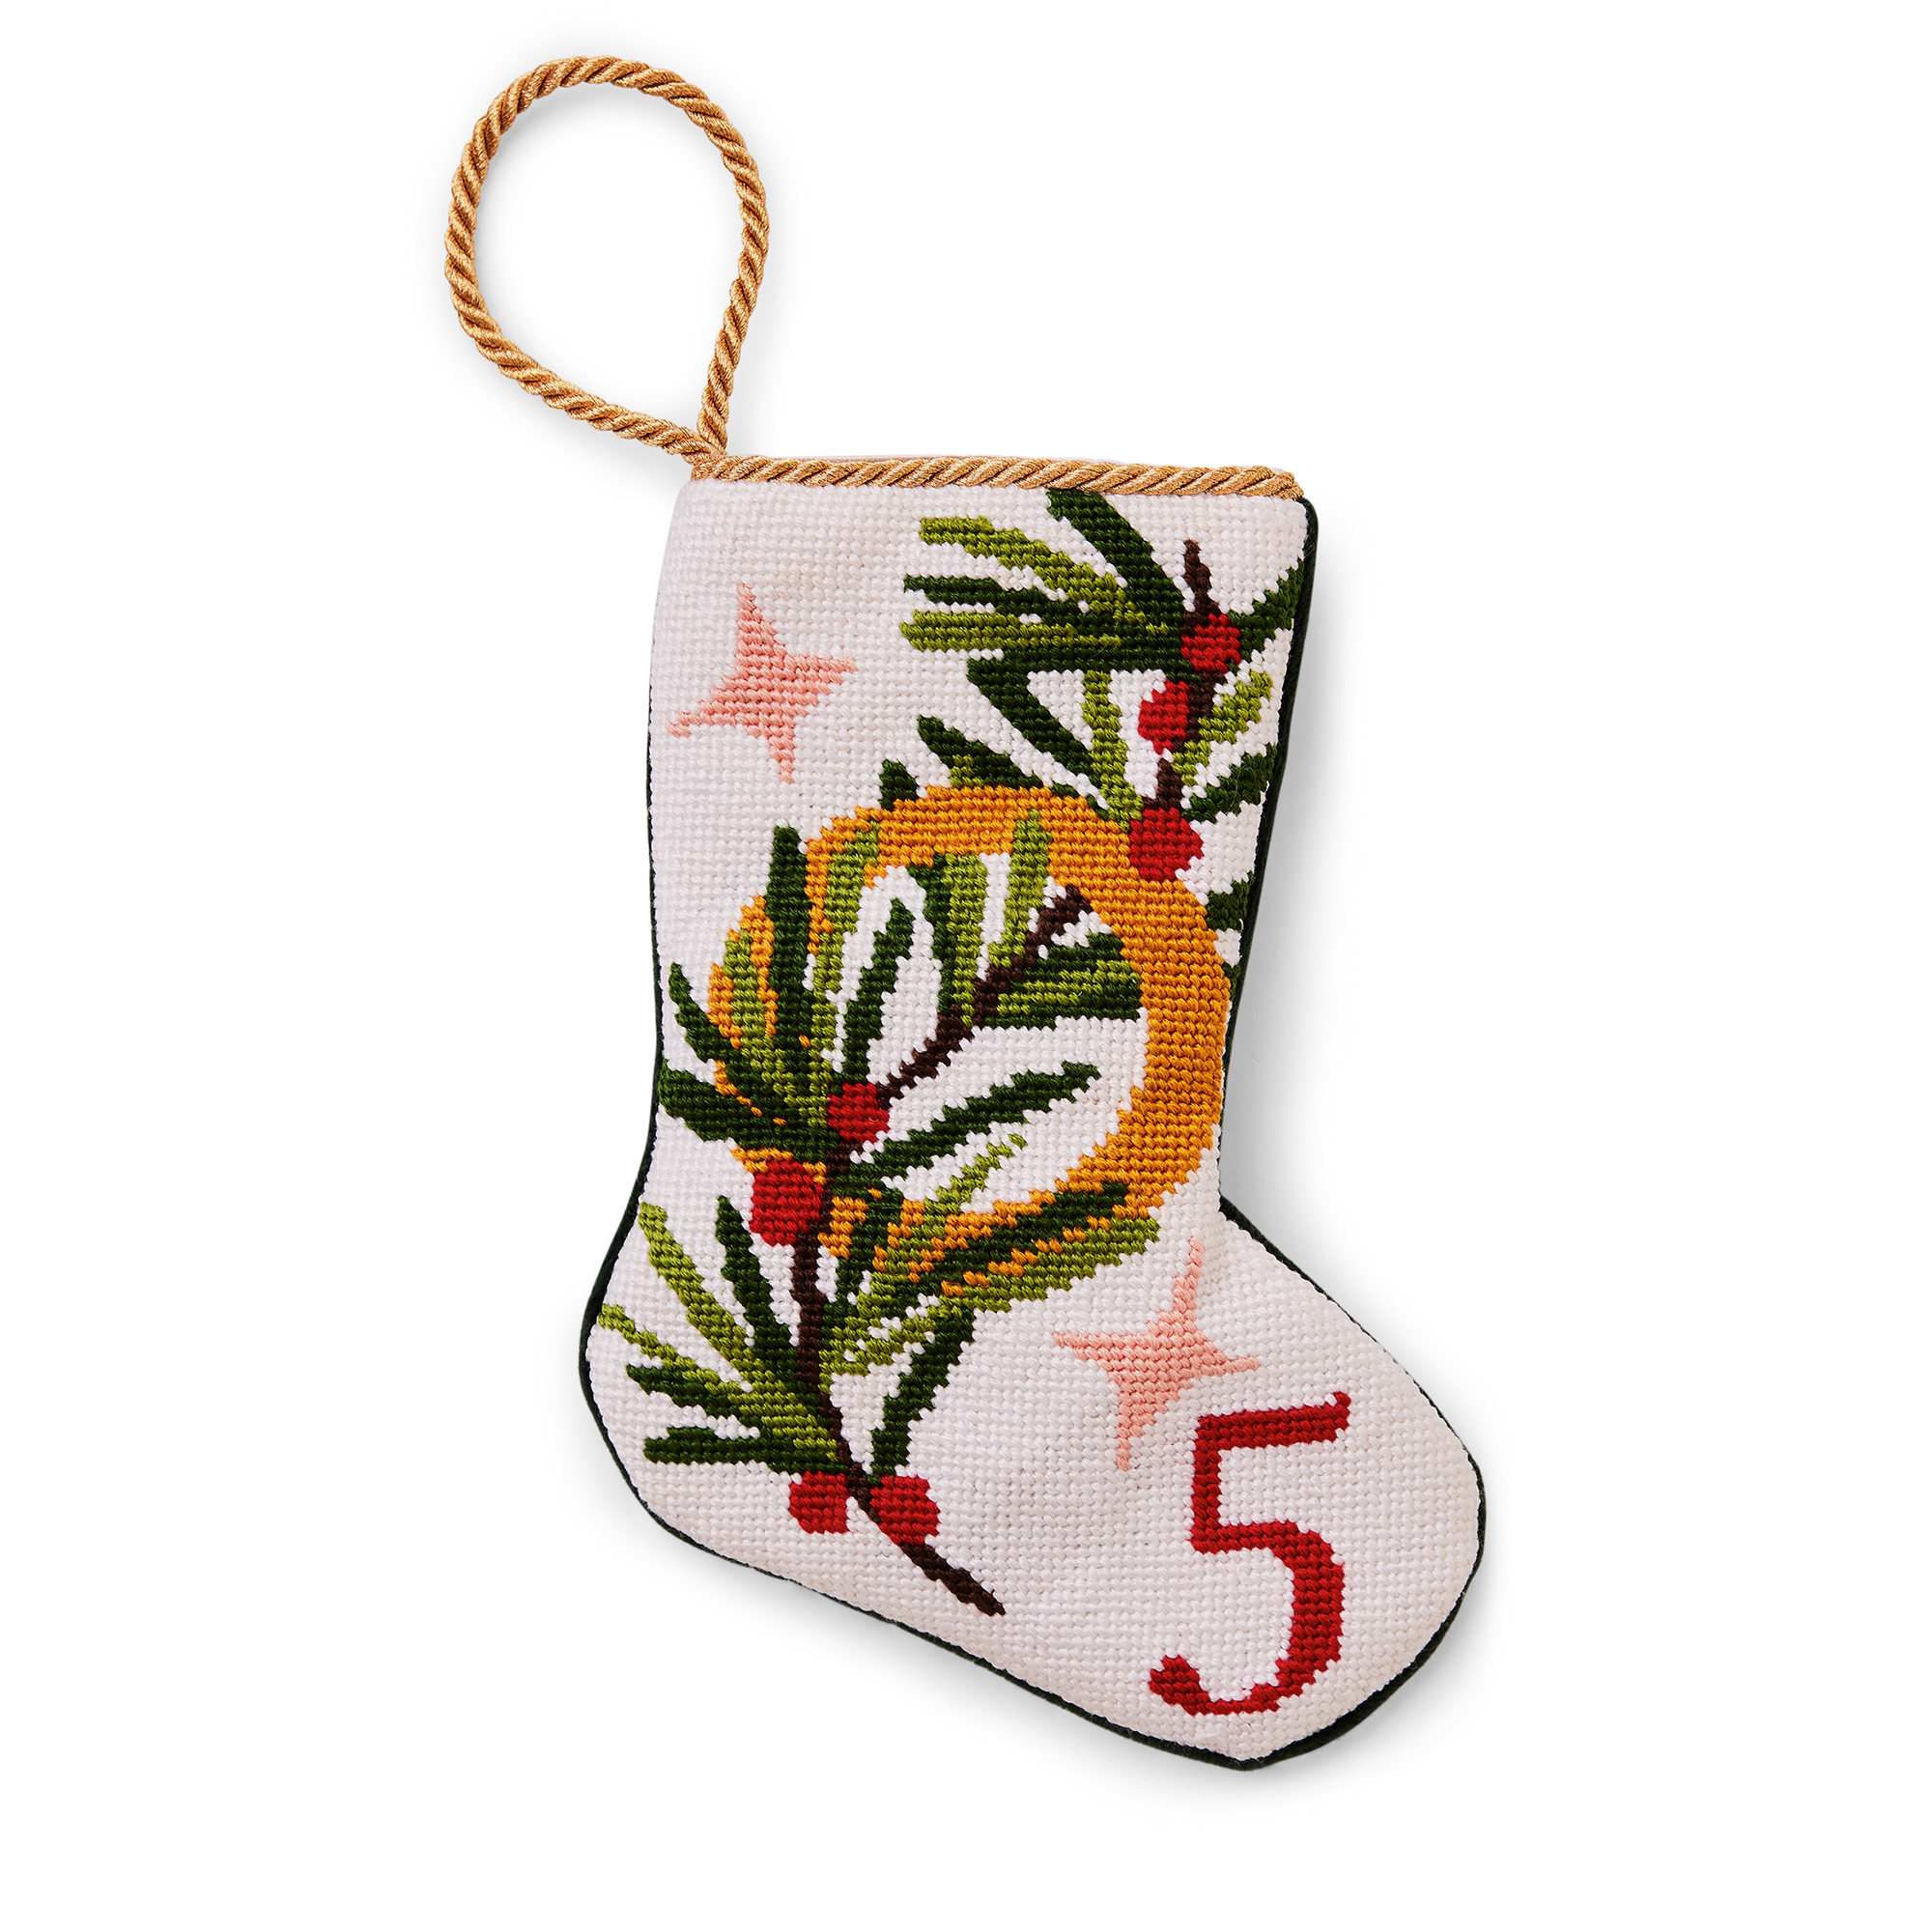 An intricately designed mini needlepoint stocking featuring the '5 Golden Rings' from the classic Christmas carol. This festive decoration adds a traditional and charming touch to your holiday decor. Perfect as tree ornaments, place settings, or for holding special gifts.